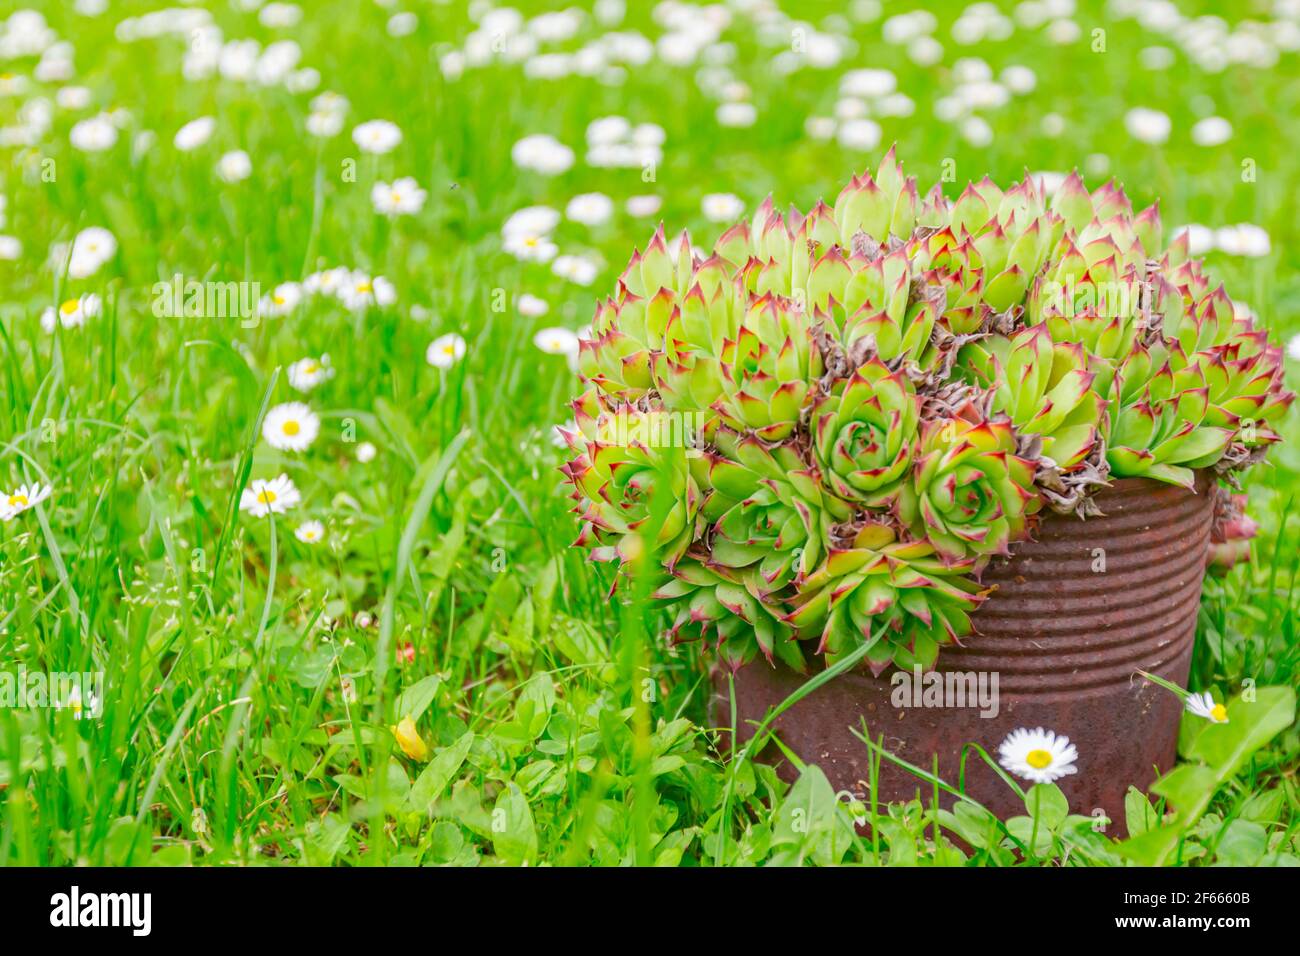 Succulent, Houseleek or Crassulaceae plant is growing in rusty metal can on a meadow with white Daisy flowers. Stock Photo